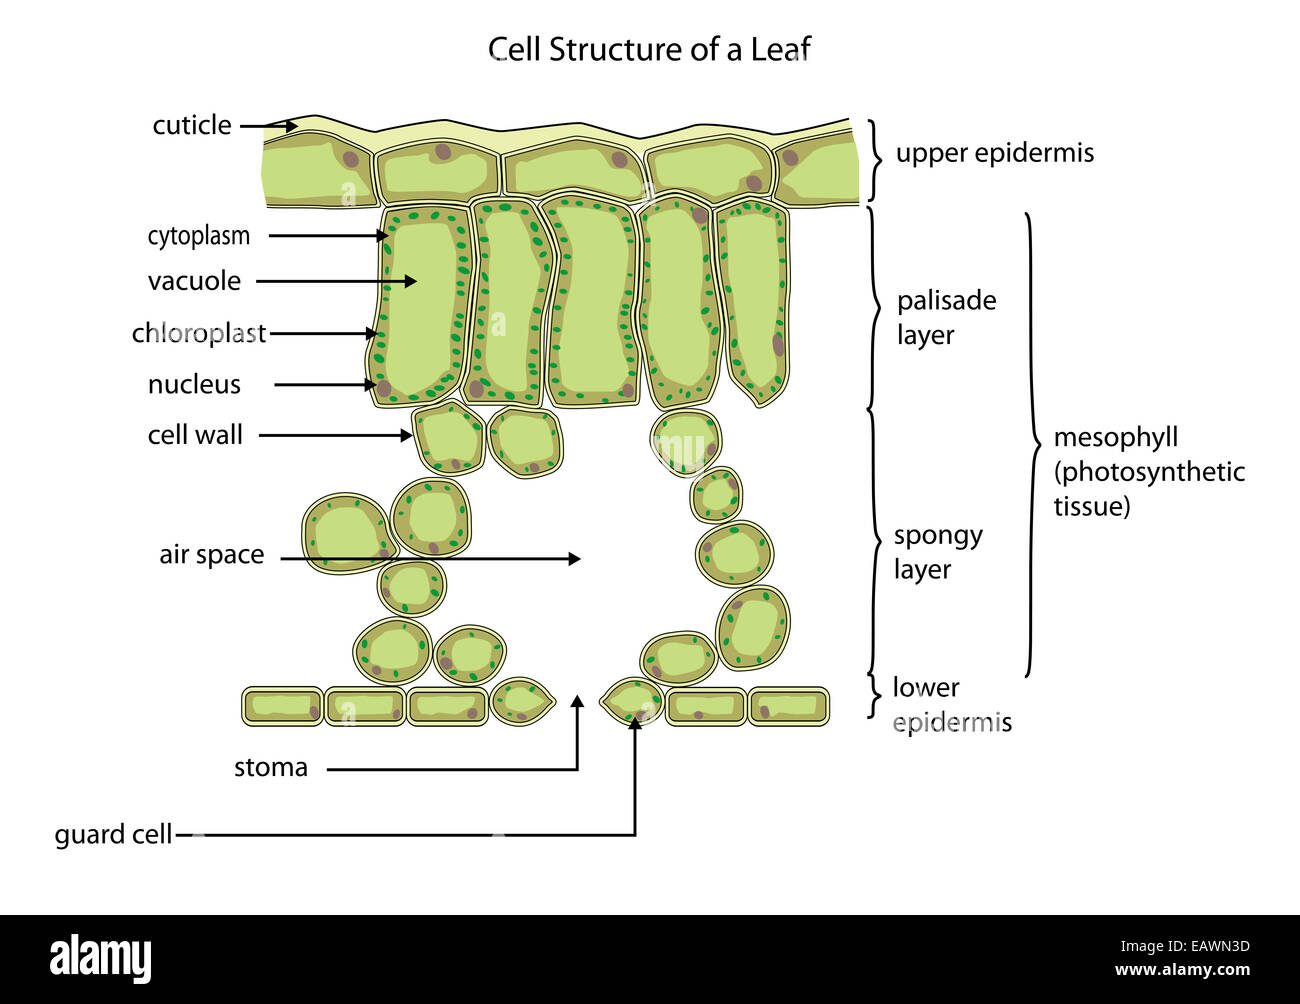 Section through a typical leaf showing the cell structure ...